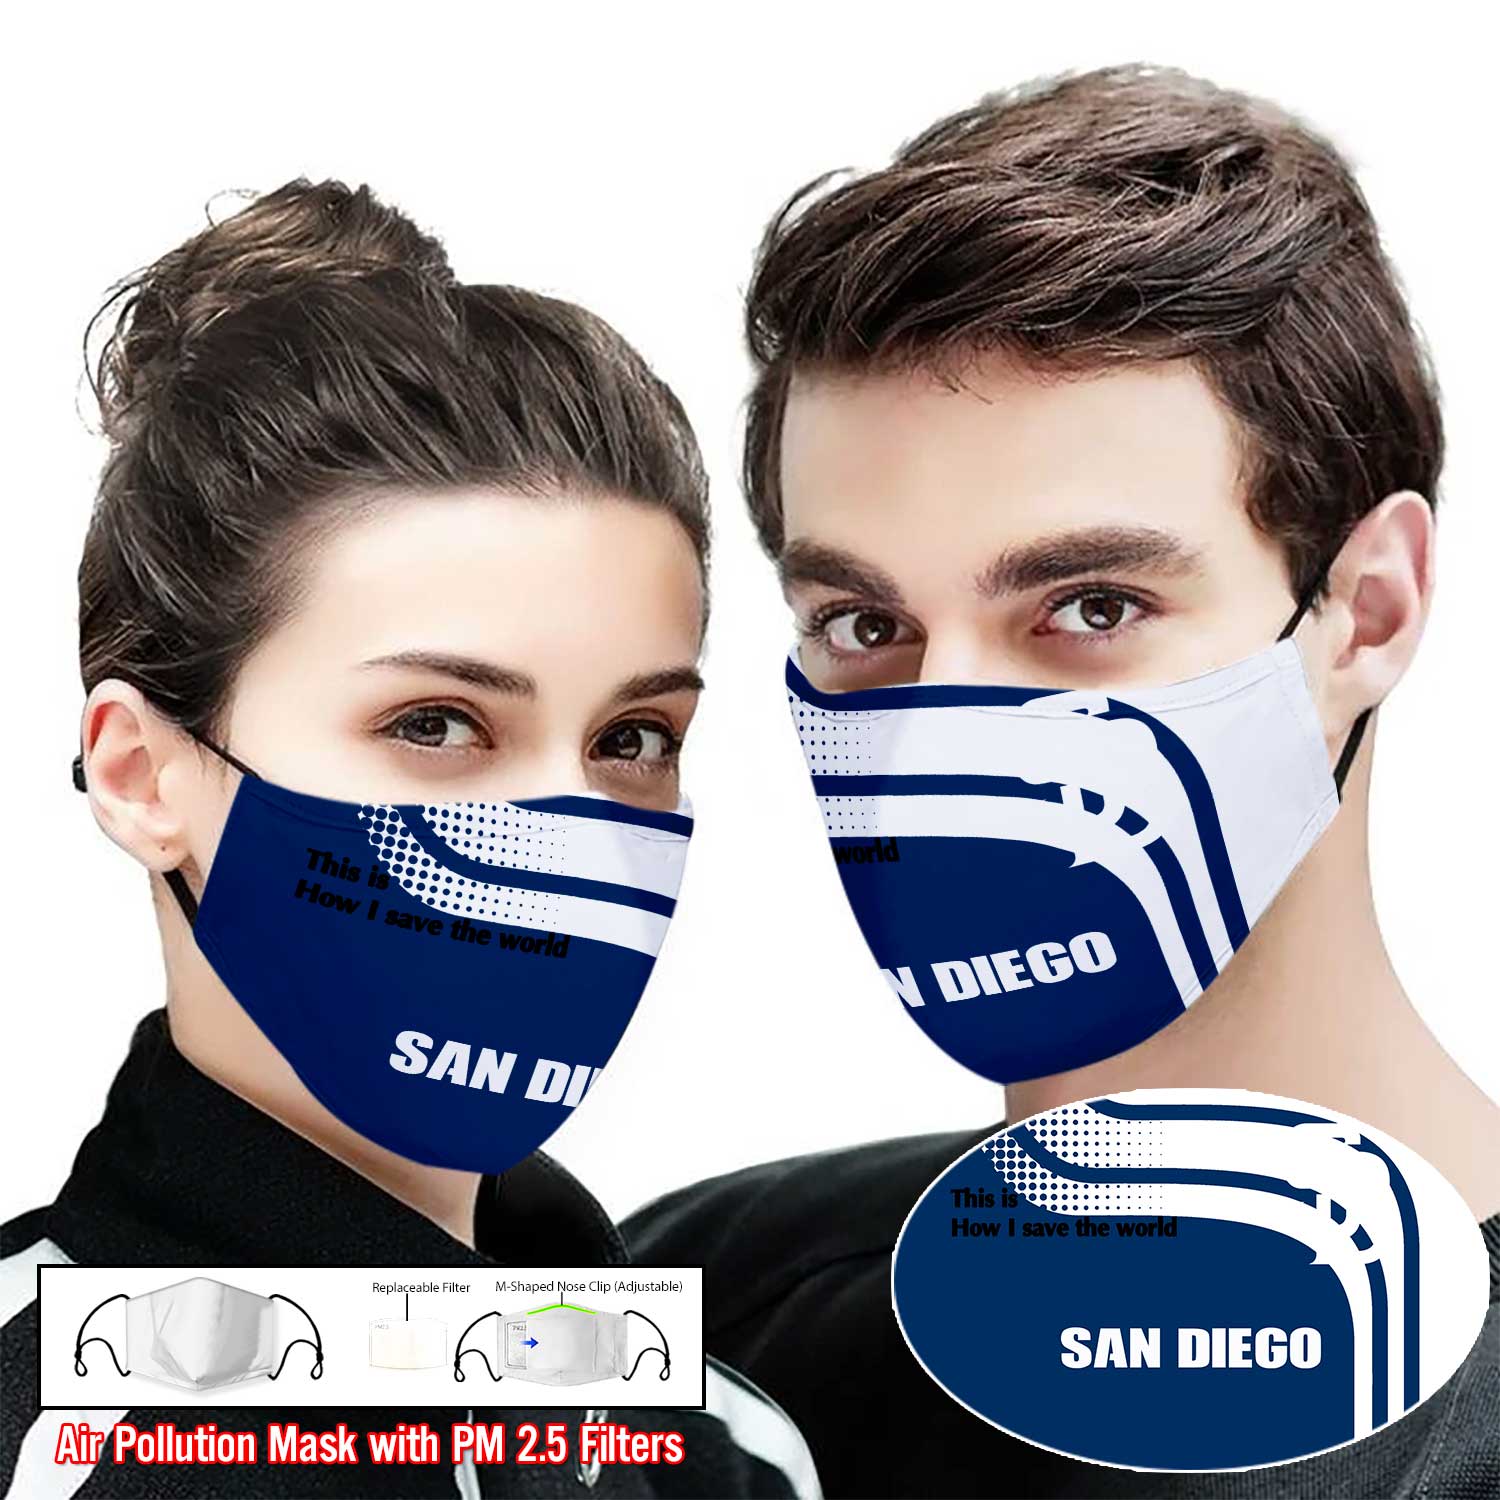 San diego padres this is how i save the world face mask – maria